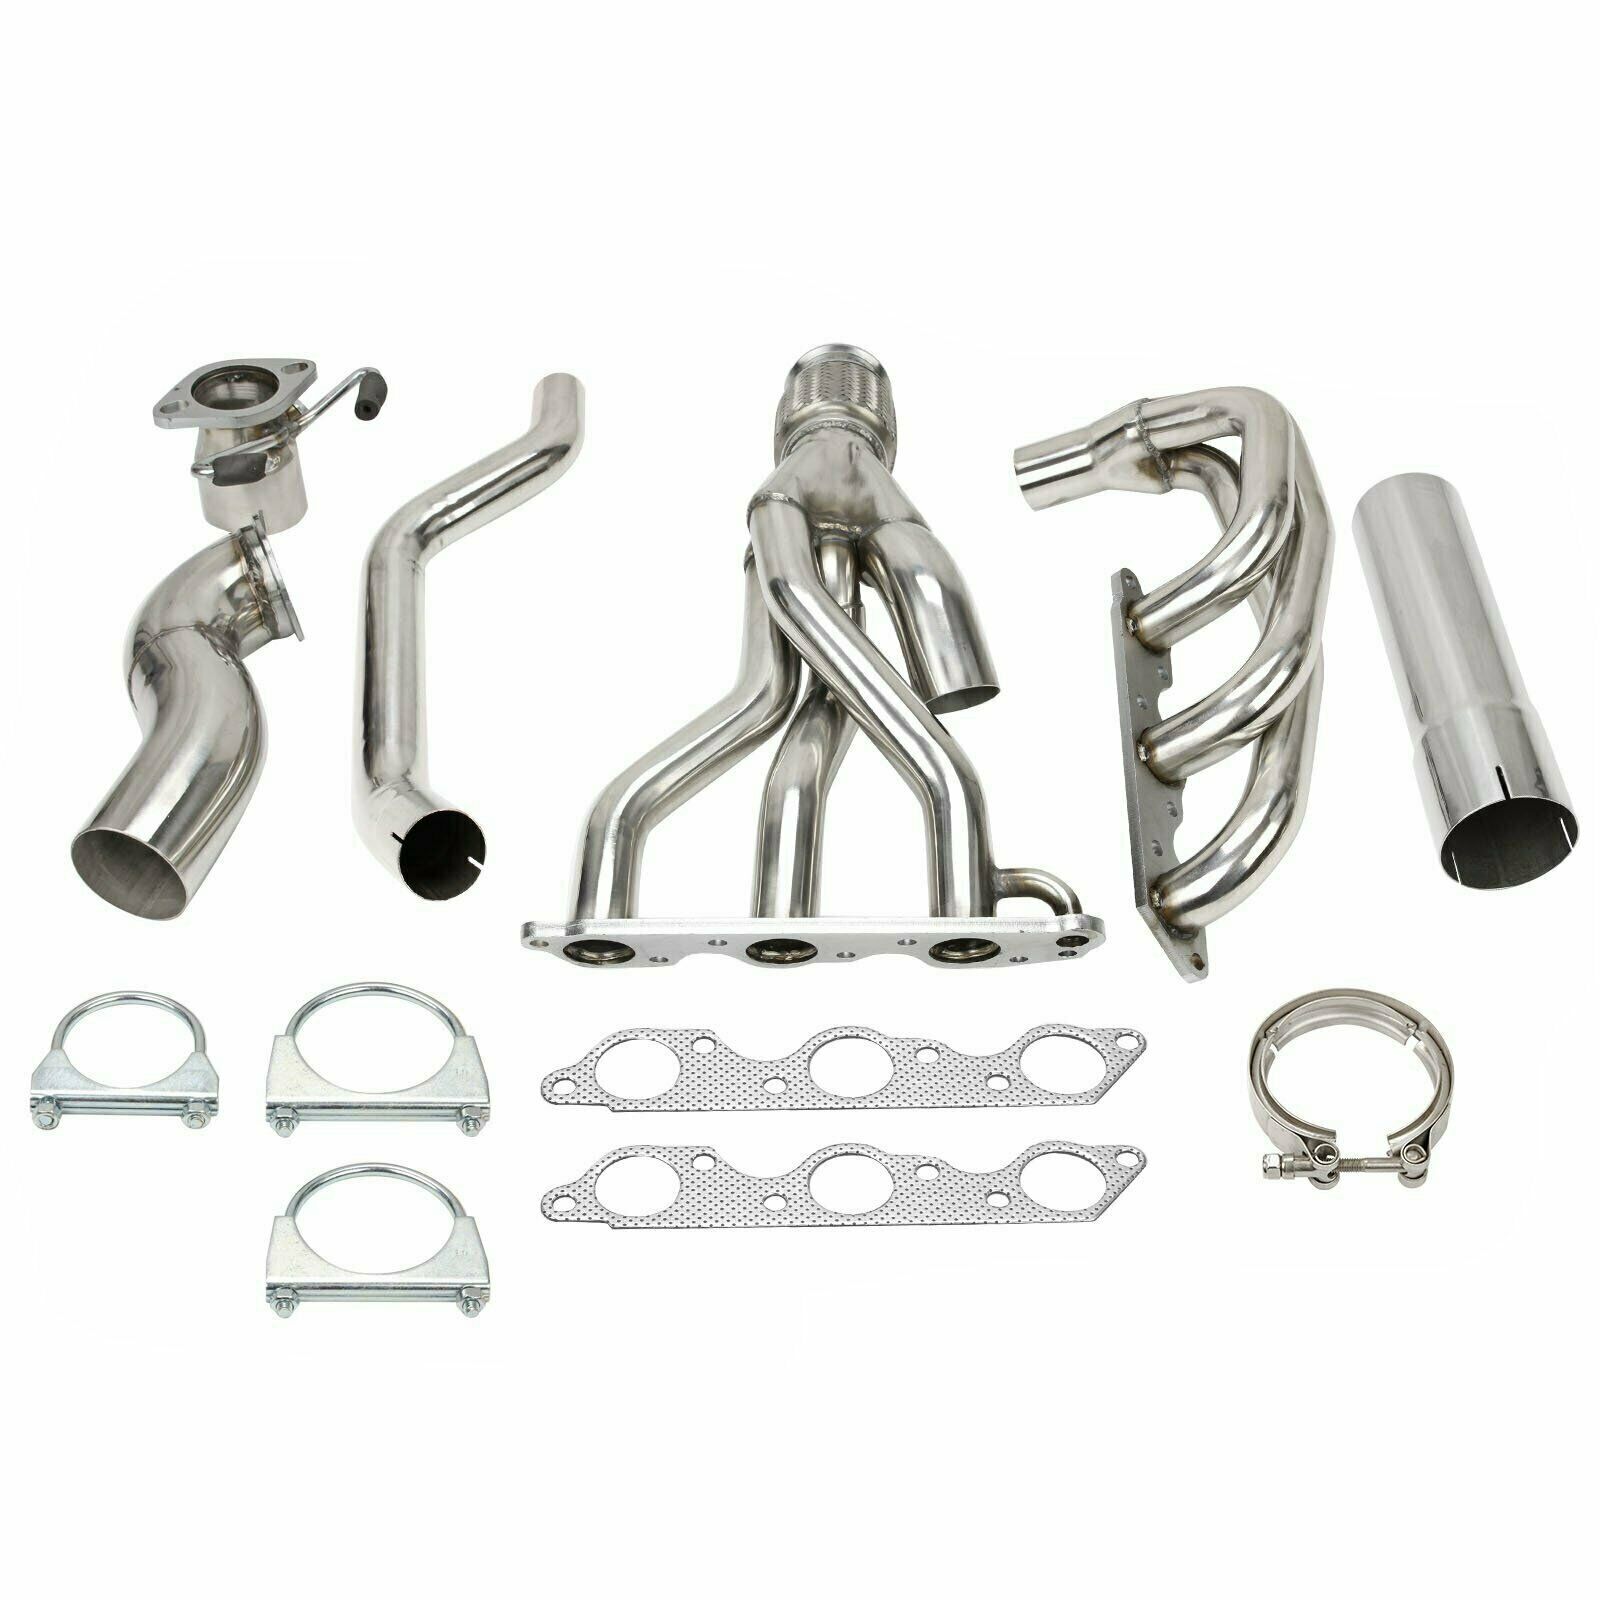 Exhaust Manifold Header Downpipe for Impala Regal Grand Prix 3.8L V6 Supercharge